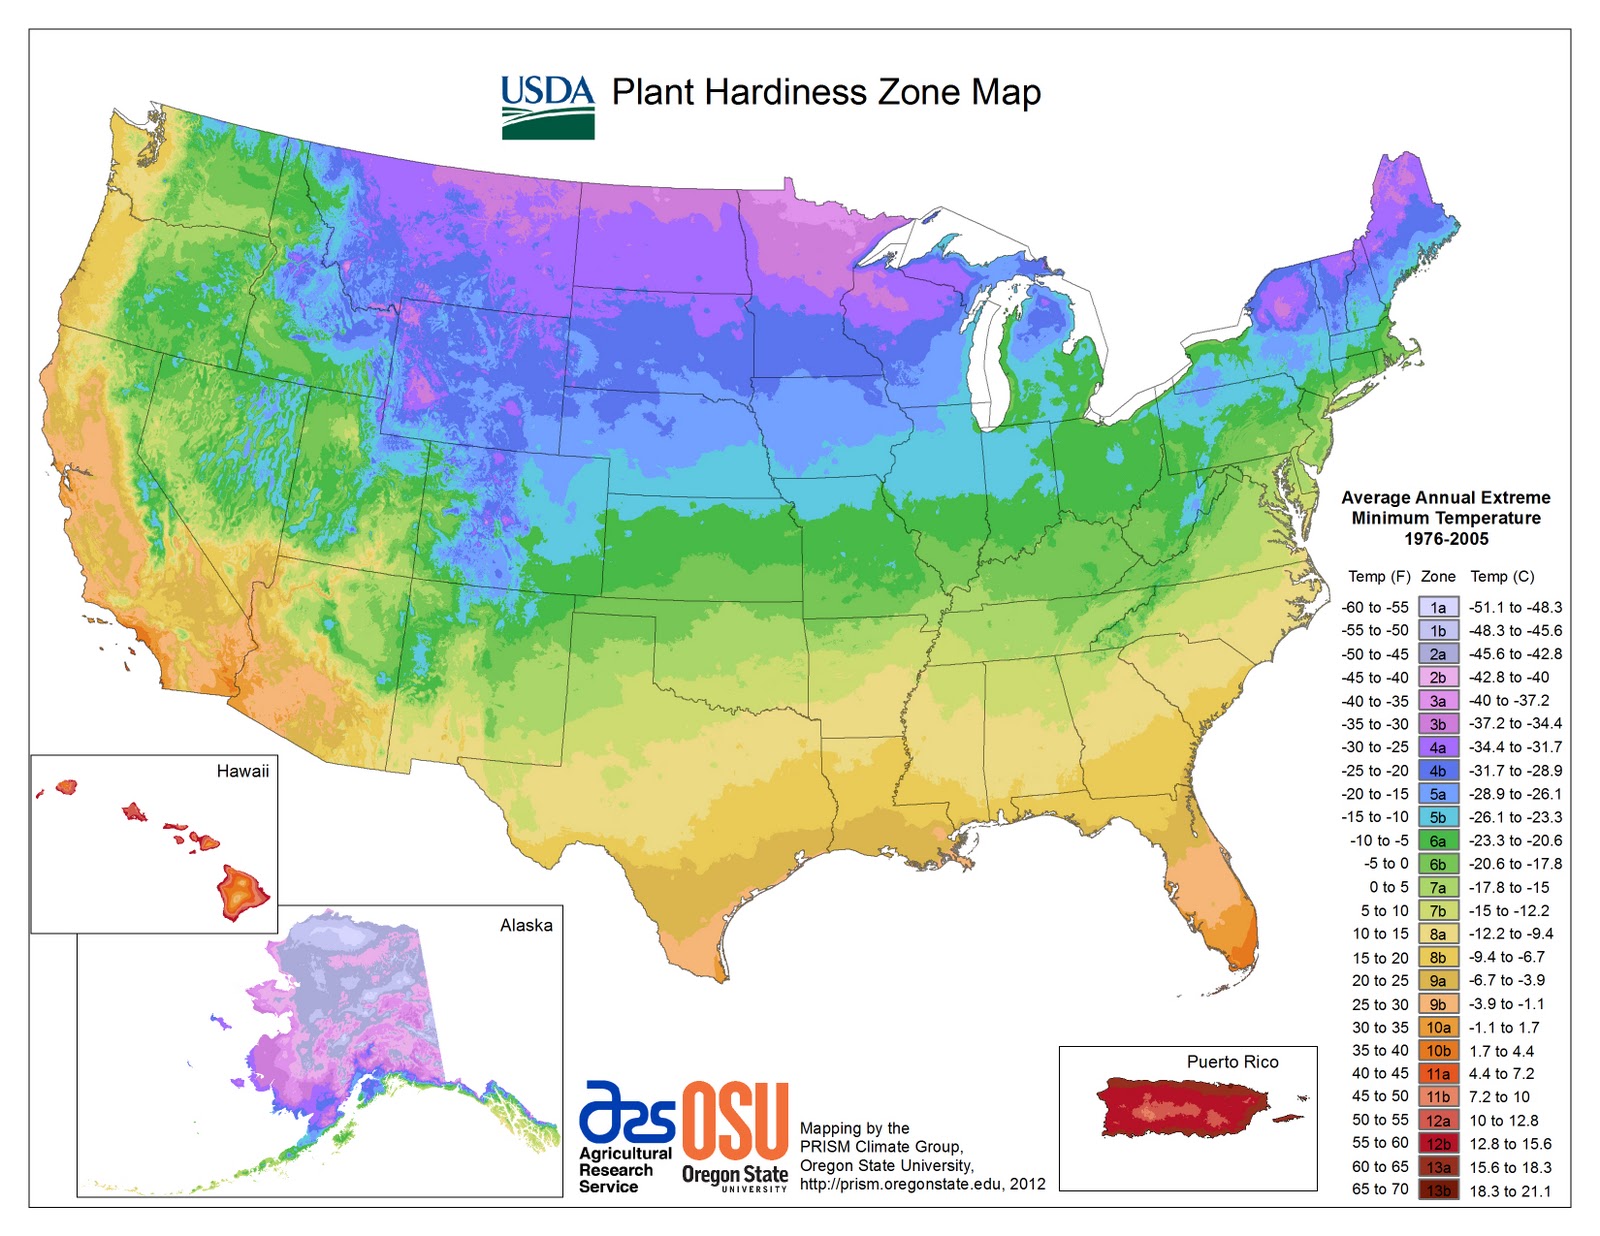 2012 USDA Plant Hardiness Zone Map - Growing The Home Garden